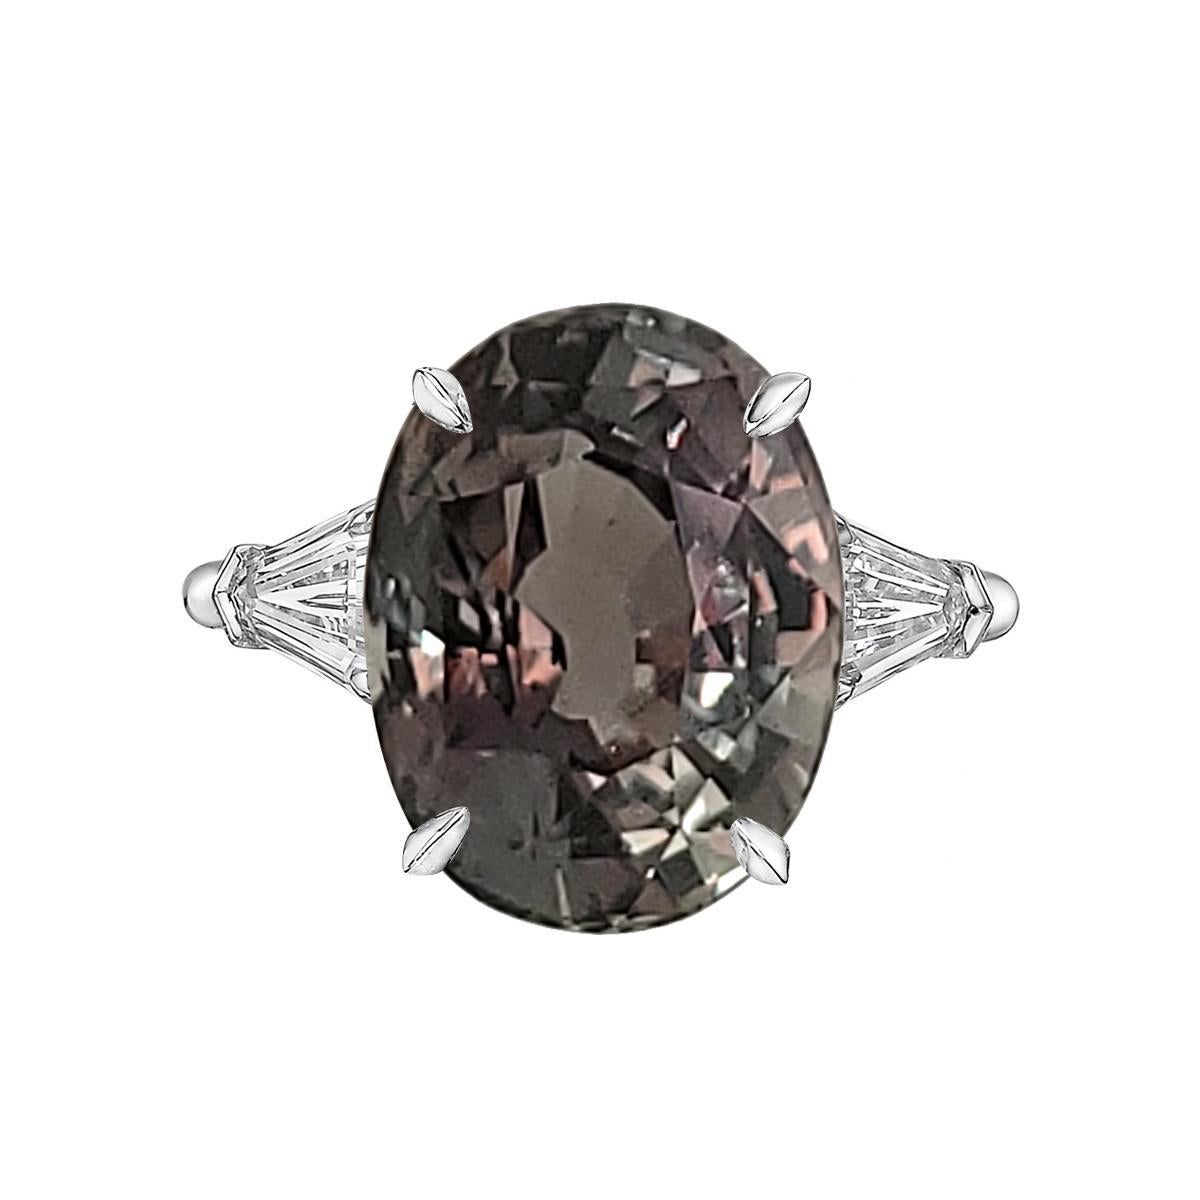 Gia certified natural Bluish green changing to pinkish purple From the Museum vault at Emilio Jewelry, Located On New York’s Iconic Fifth Avenue:
Showcasing a magnificent Alexandrite set in the center certified as Ceylon origin and untreated. Total